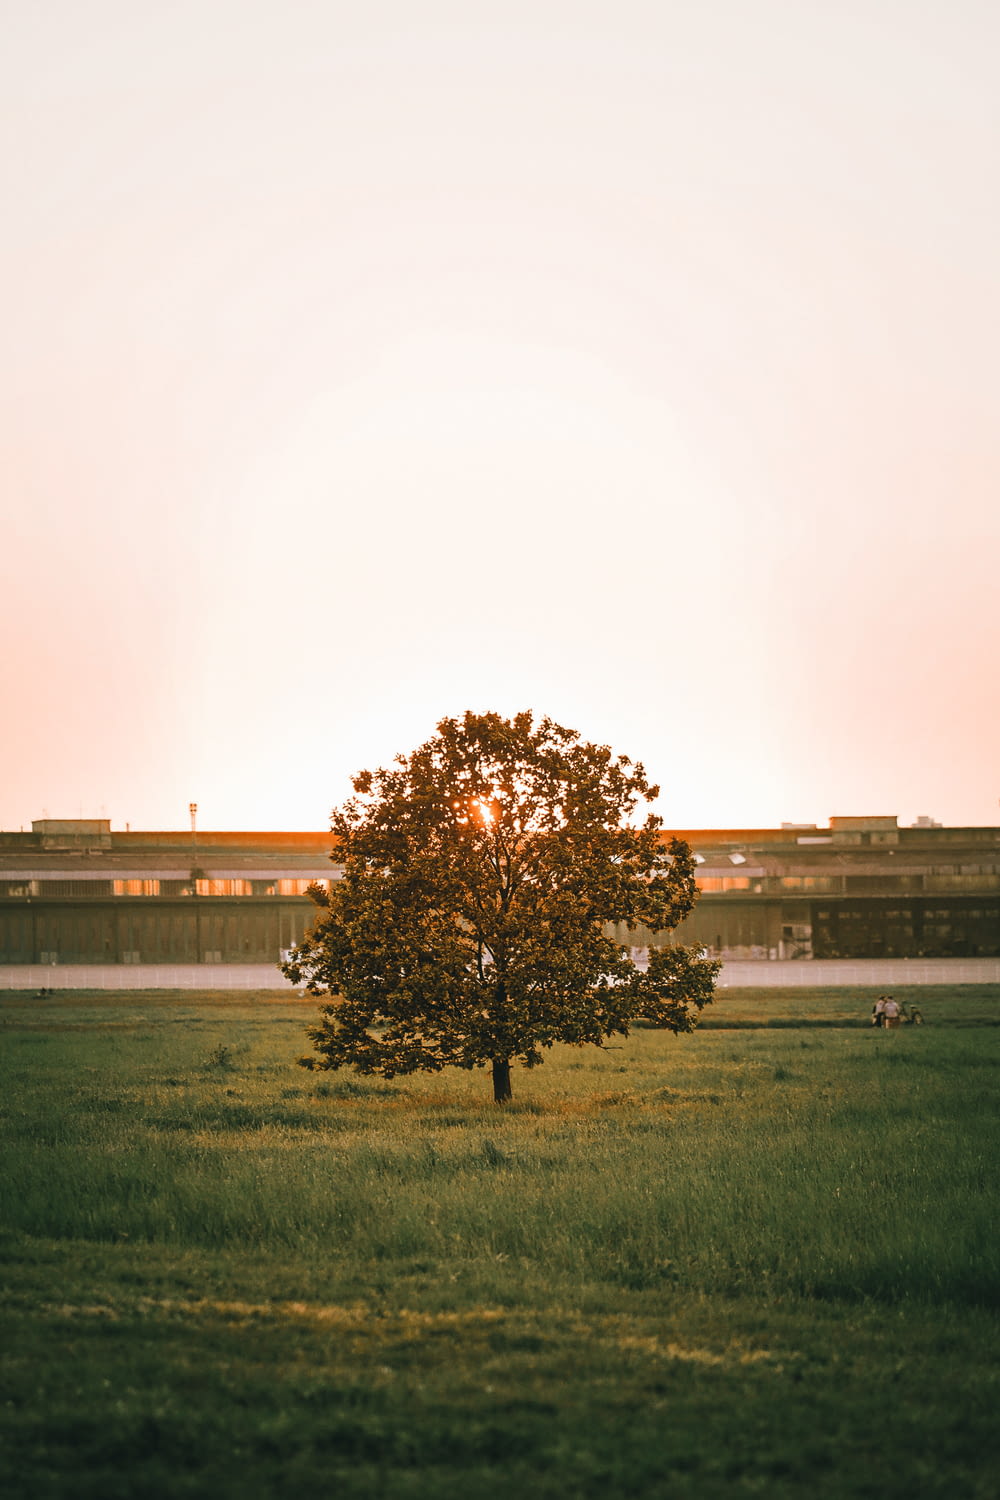 a lone tree in a field with a train in the background